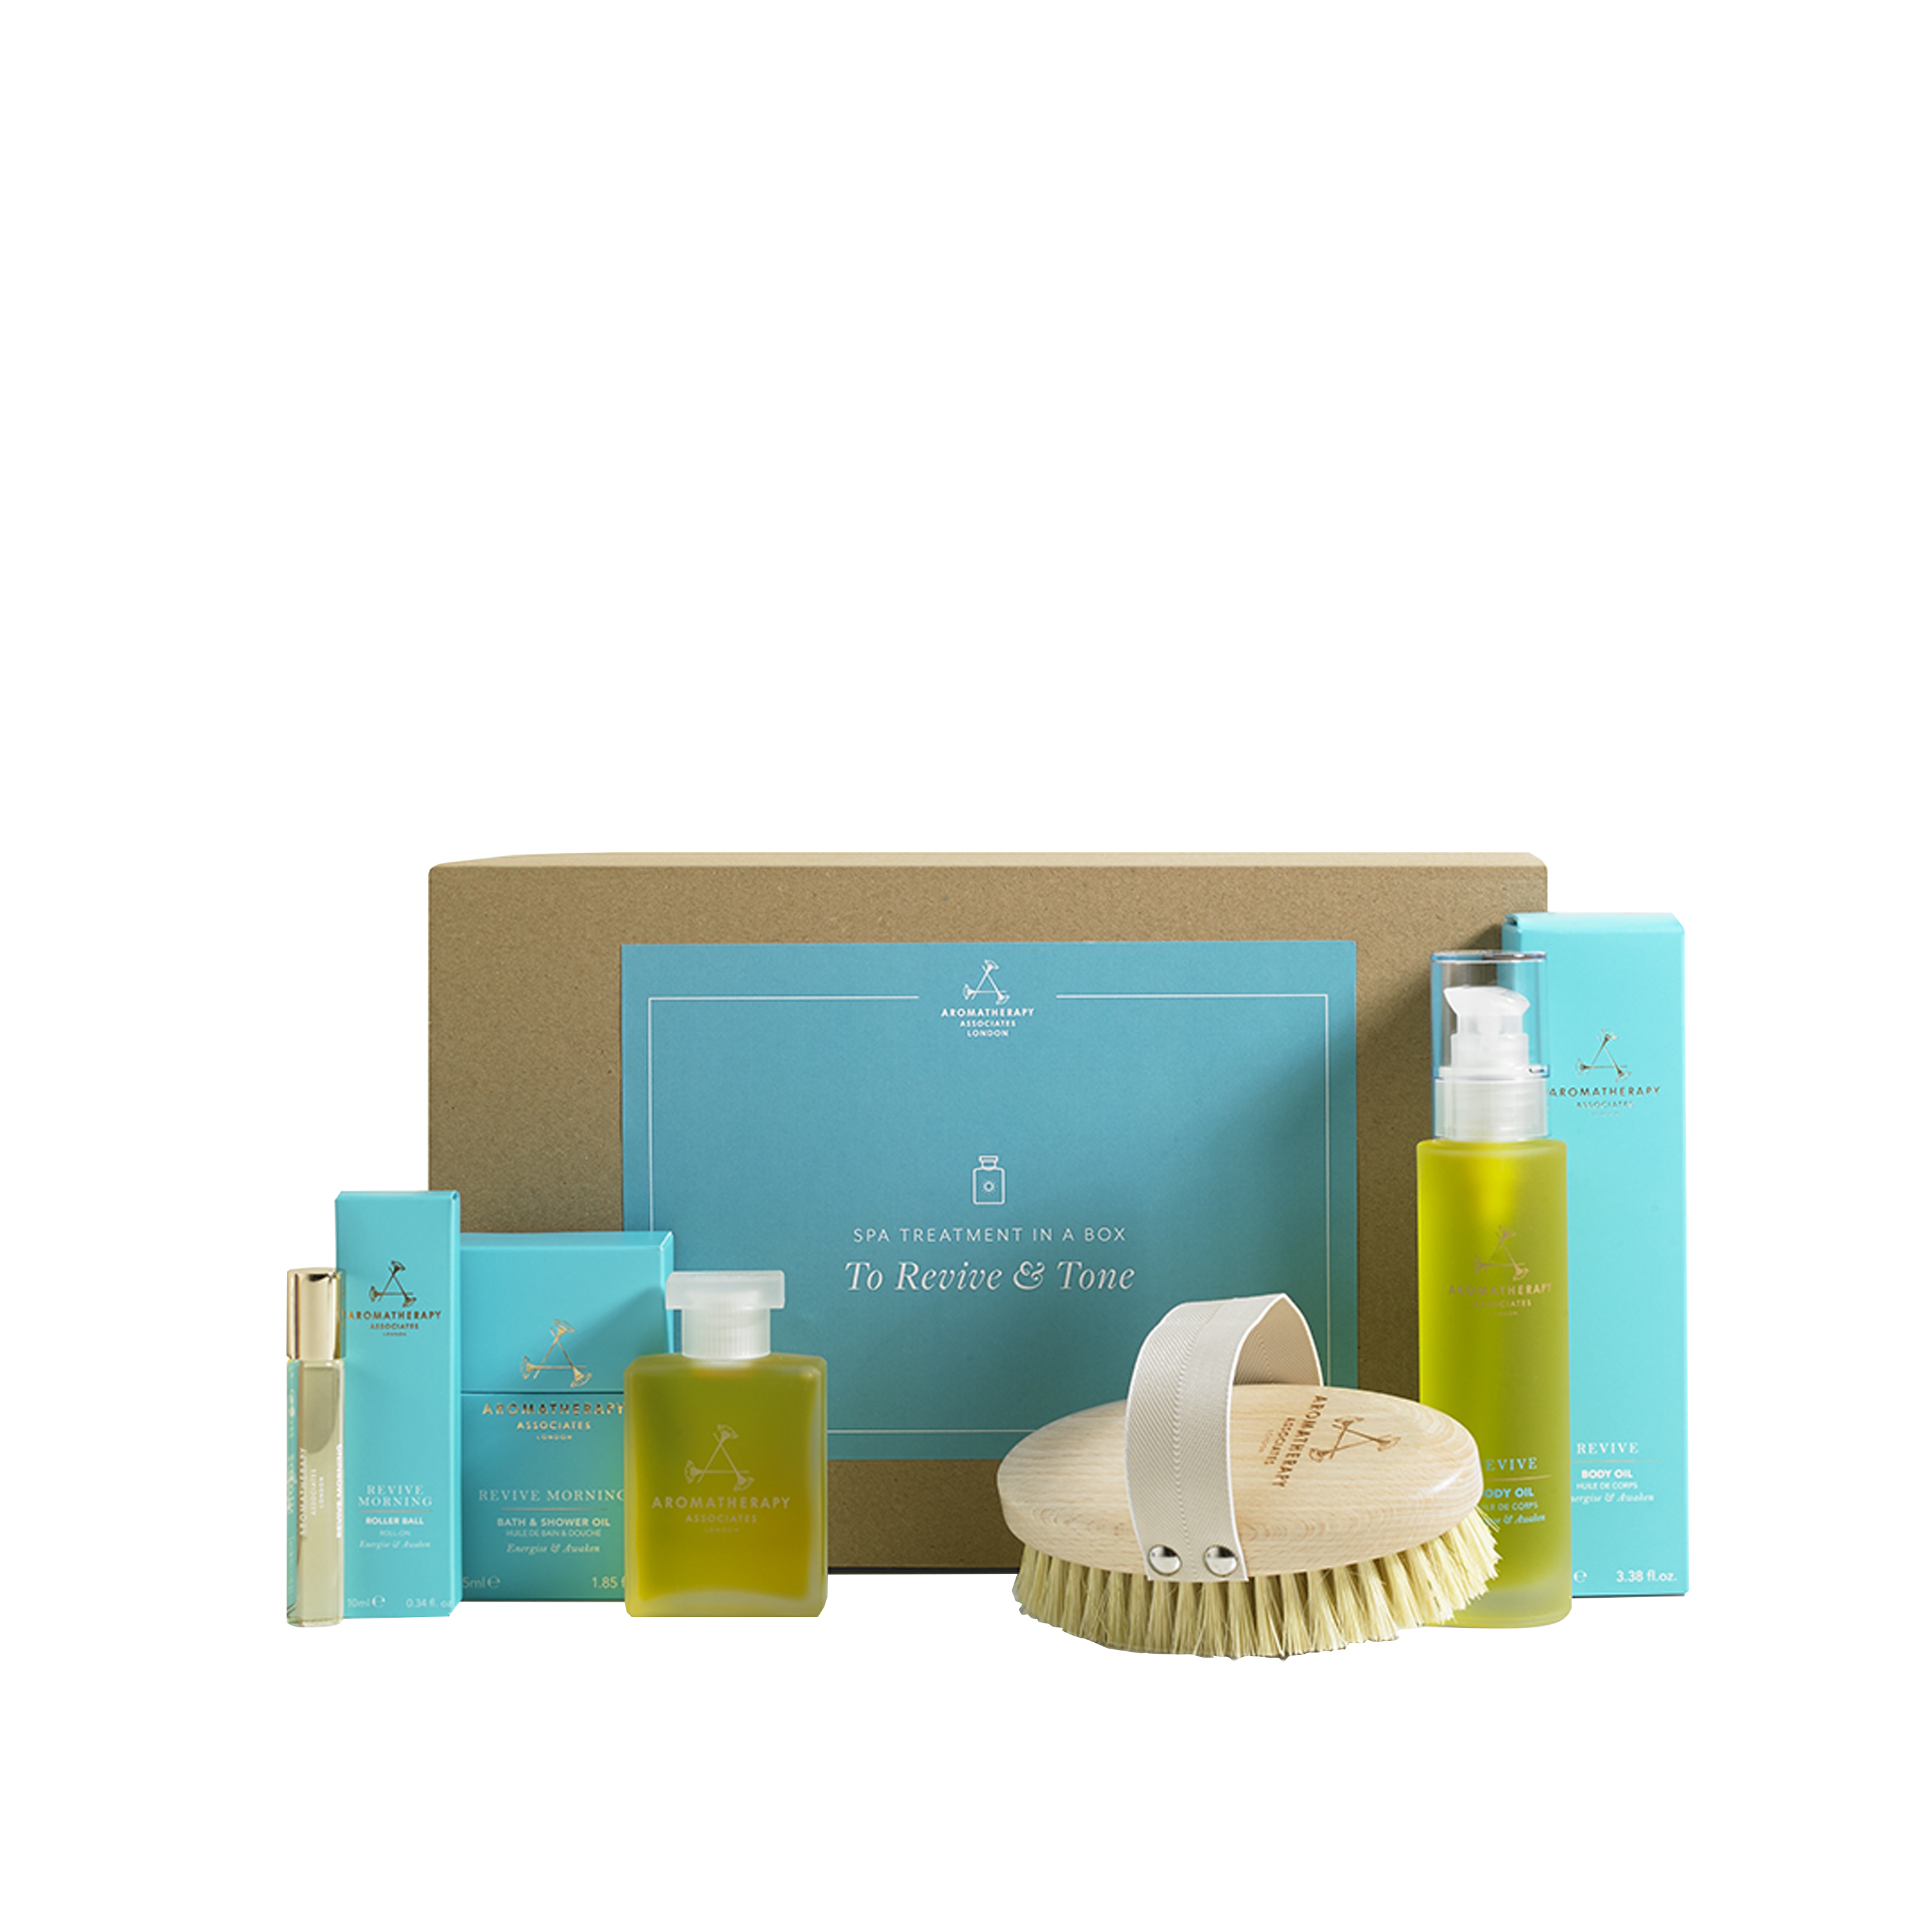 Spa Treatment In A Box - To Revive & Tone